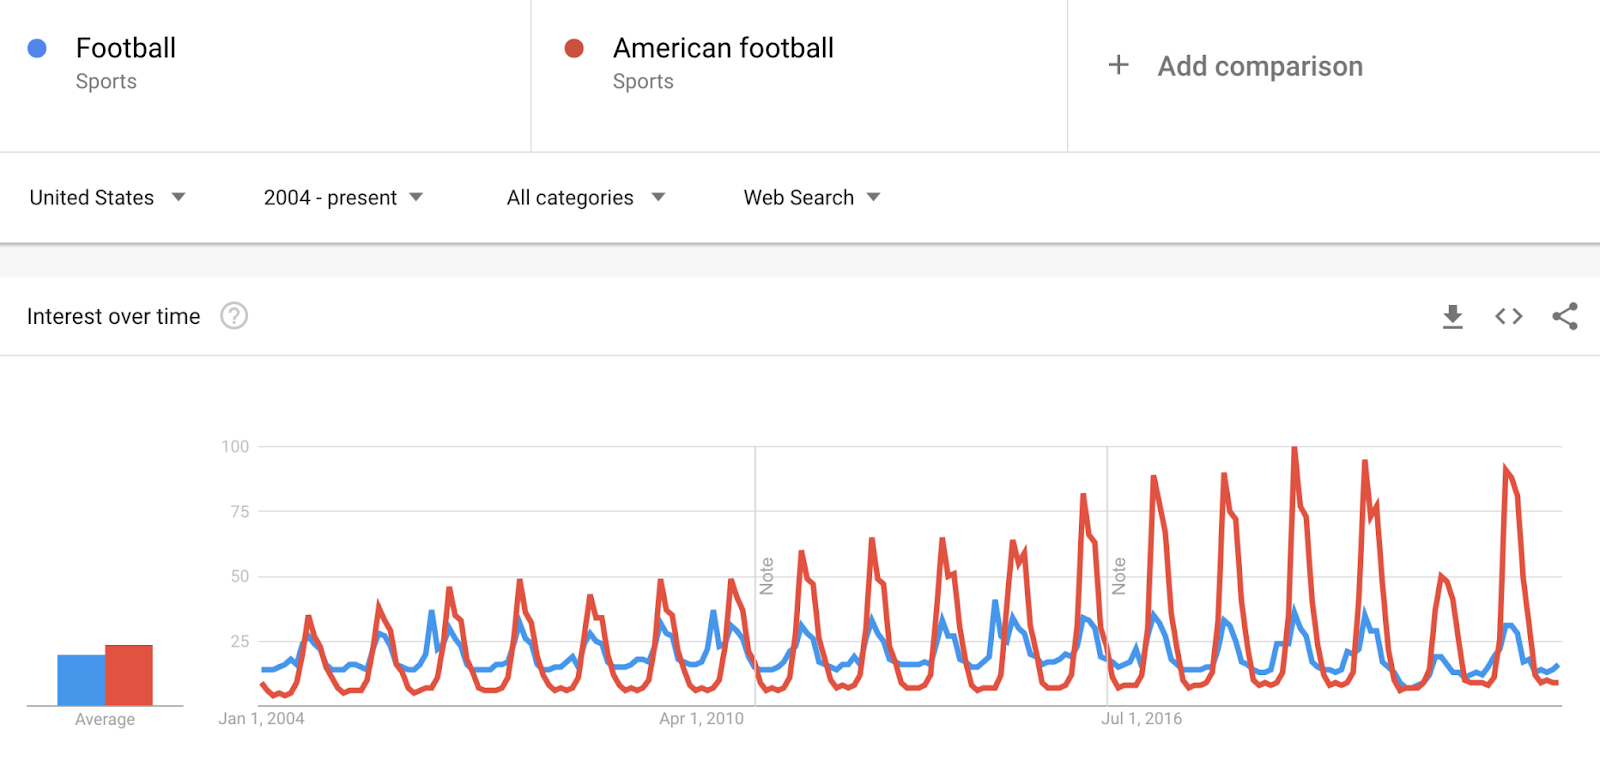 Google Trends "Interest over time" graph for "football"